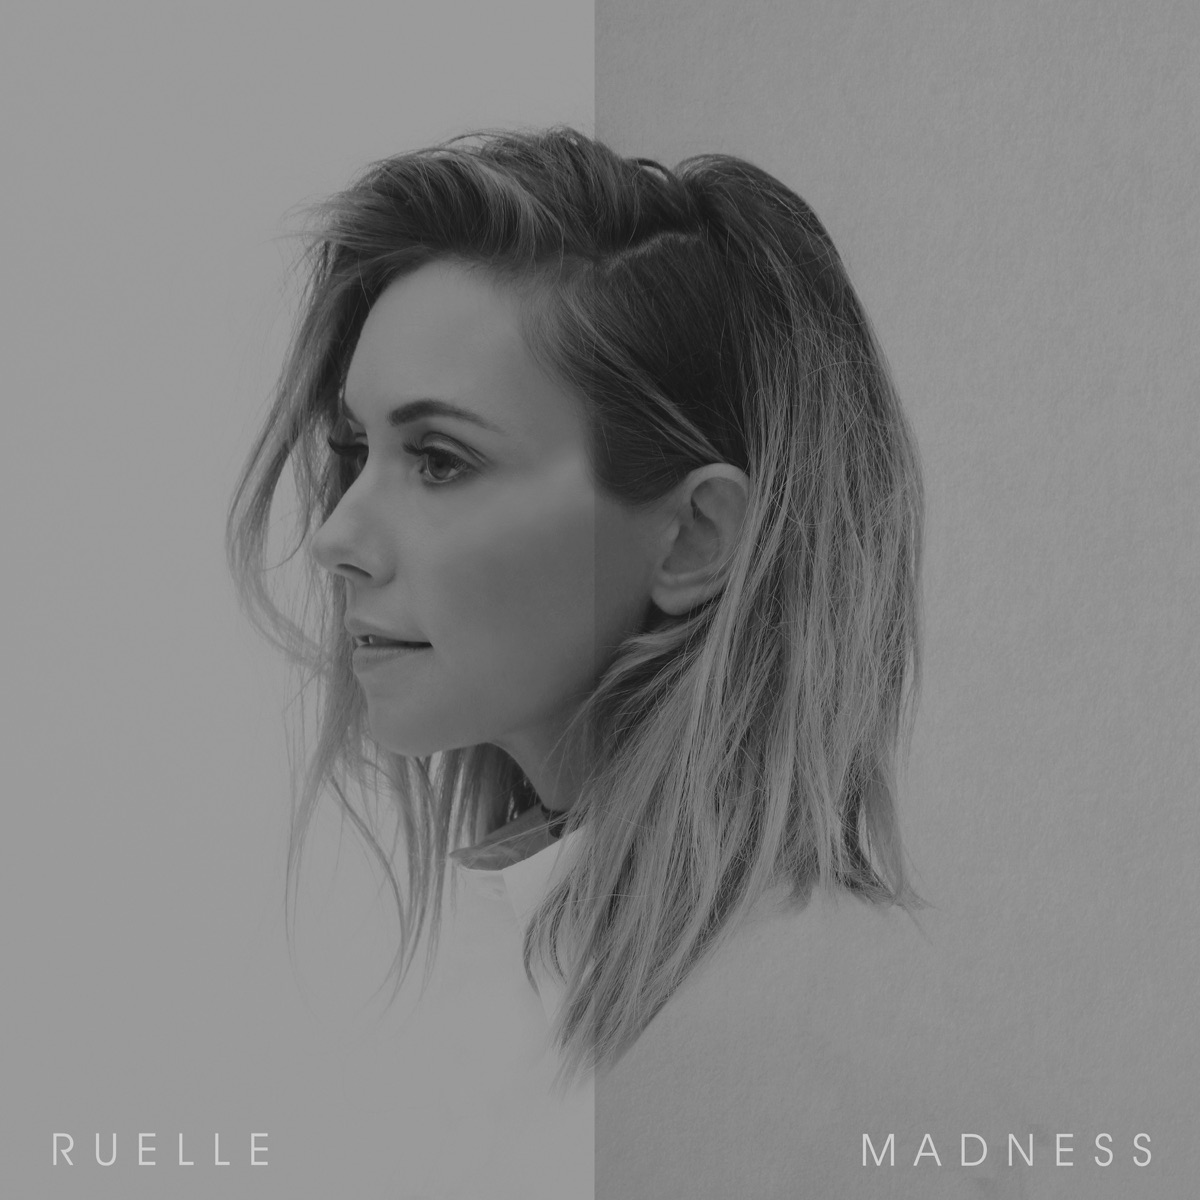 I Get to Love You - Single by Ruelle on Apple Music